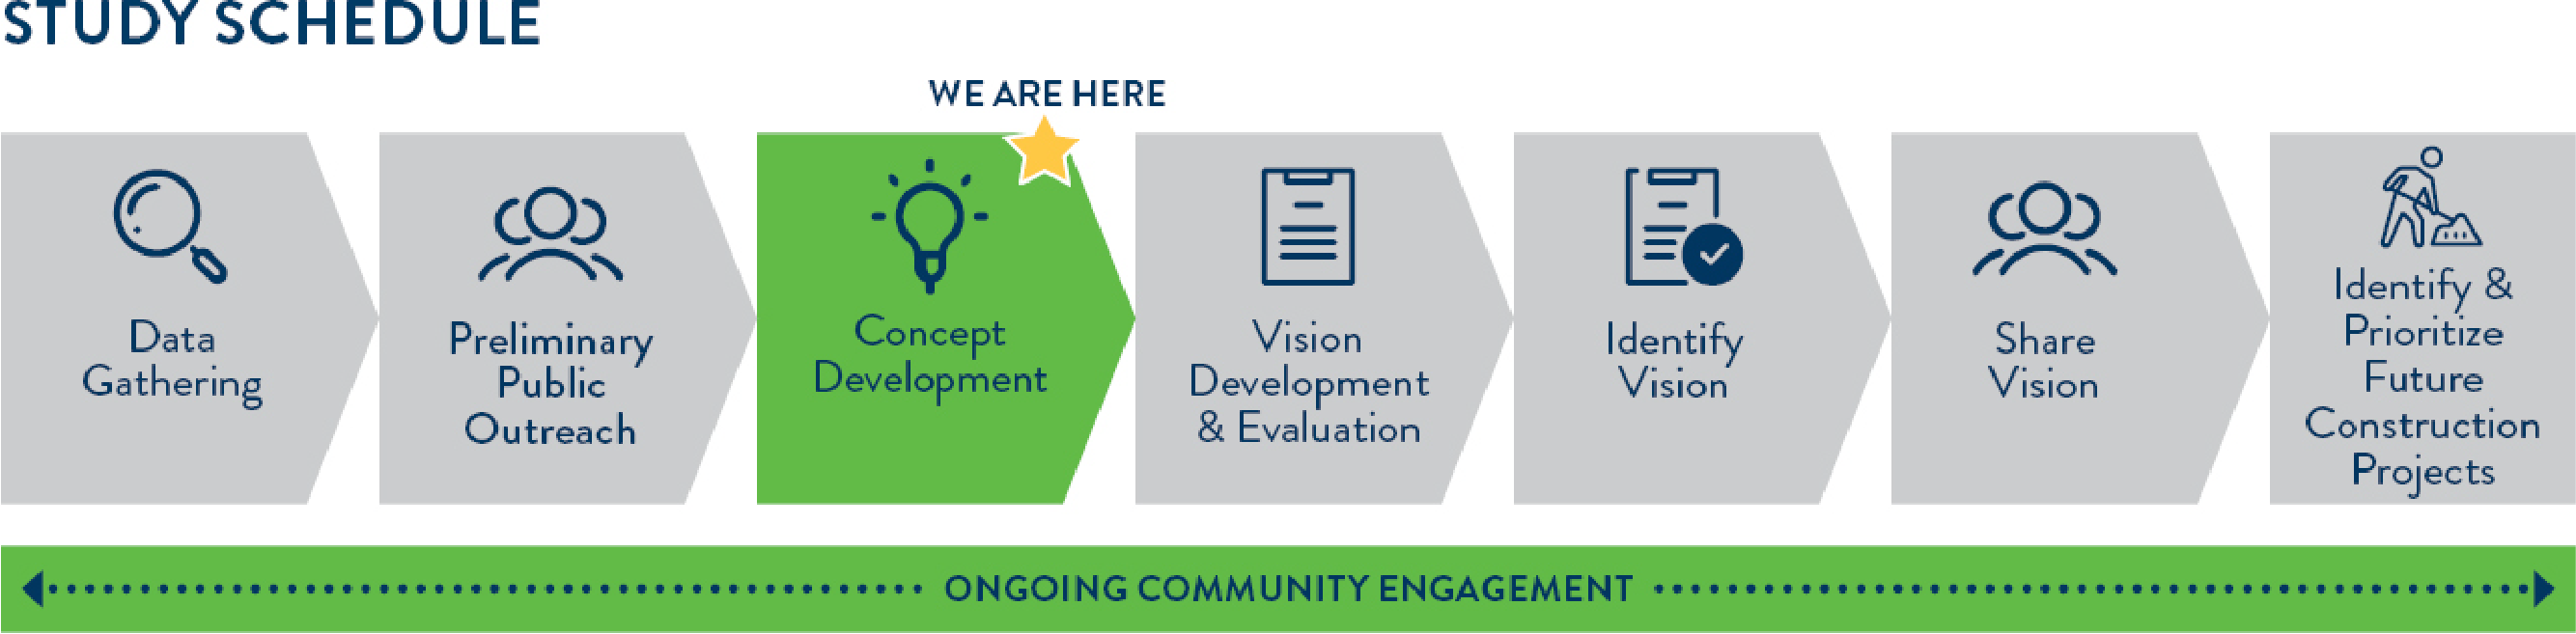 This study is in the concept development phase. The next phases are vision development and evaluation; identifying the vision; sharing the vision; and identifying and prioritizing future construction projects. Throughout the study, the study team will be engaging the community for input and feedback. 